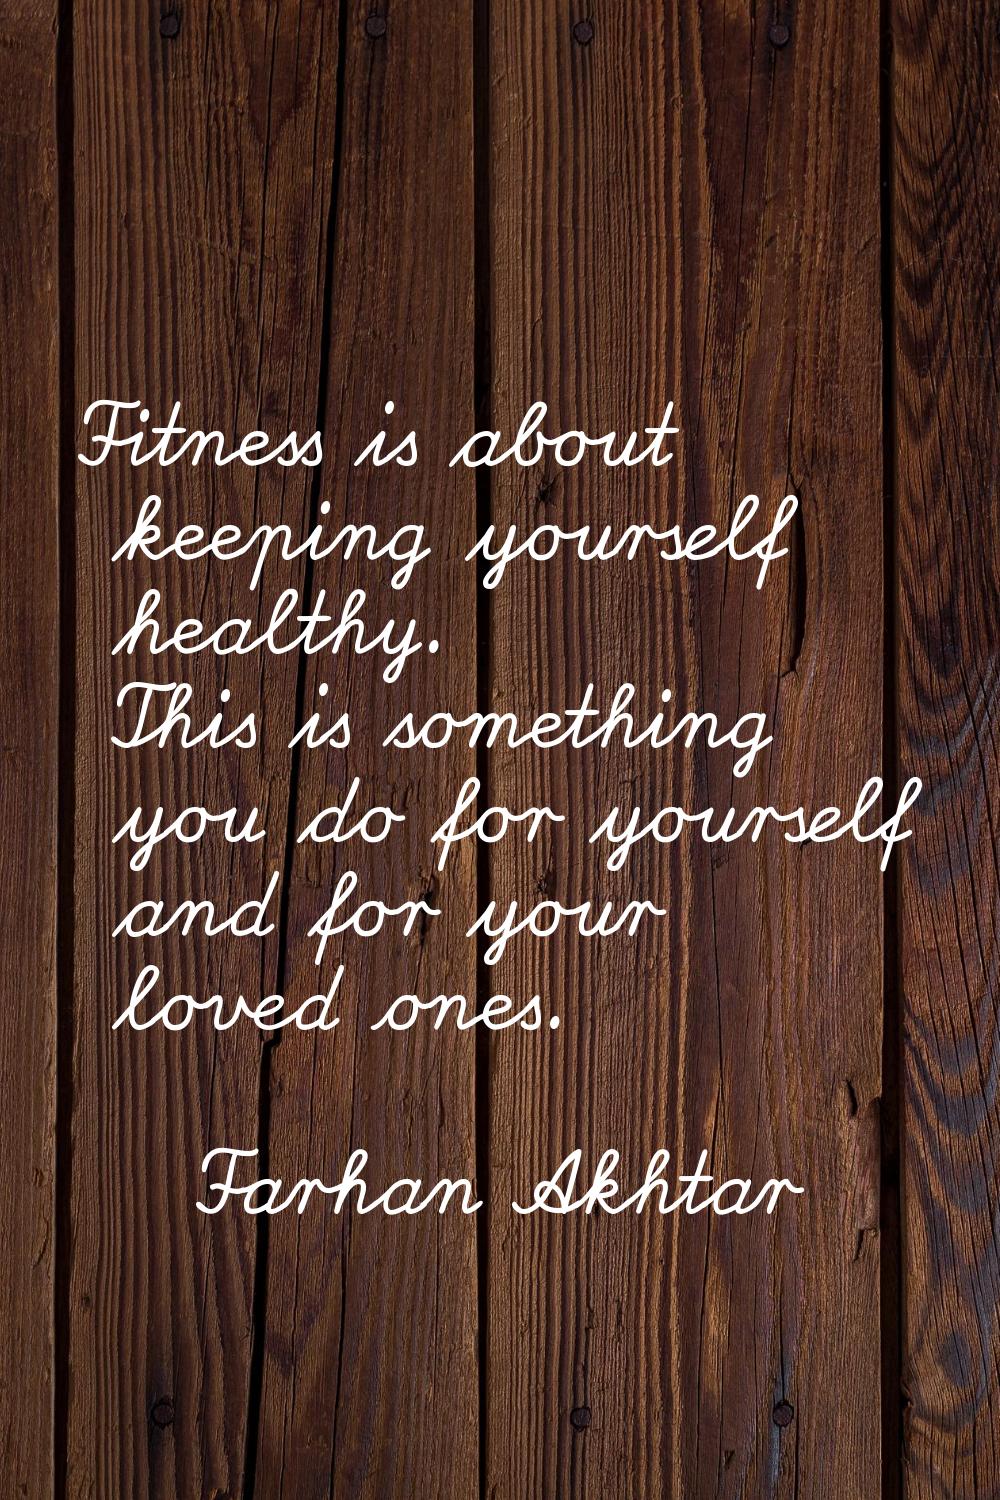 Fitness is about keeping yourself healthy. This is something you do for yourself and for your loved